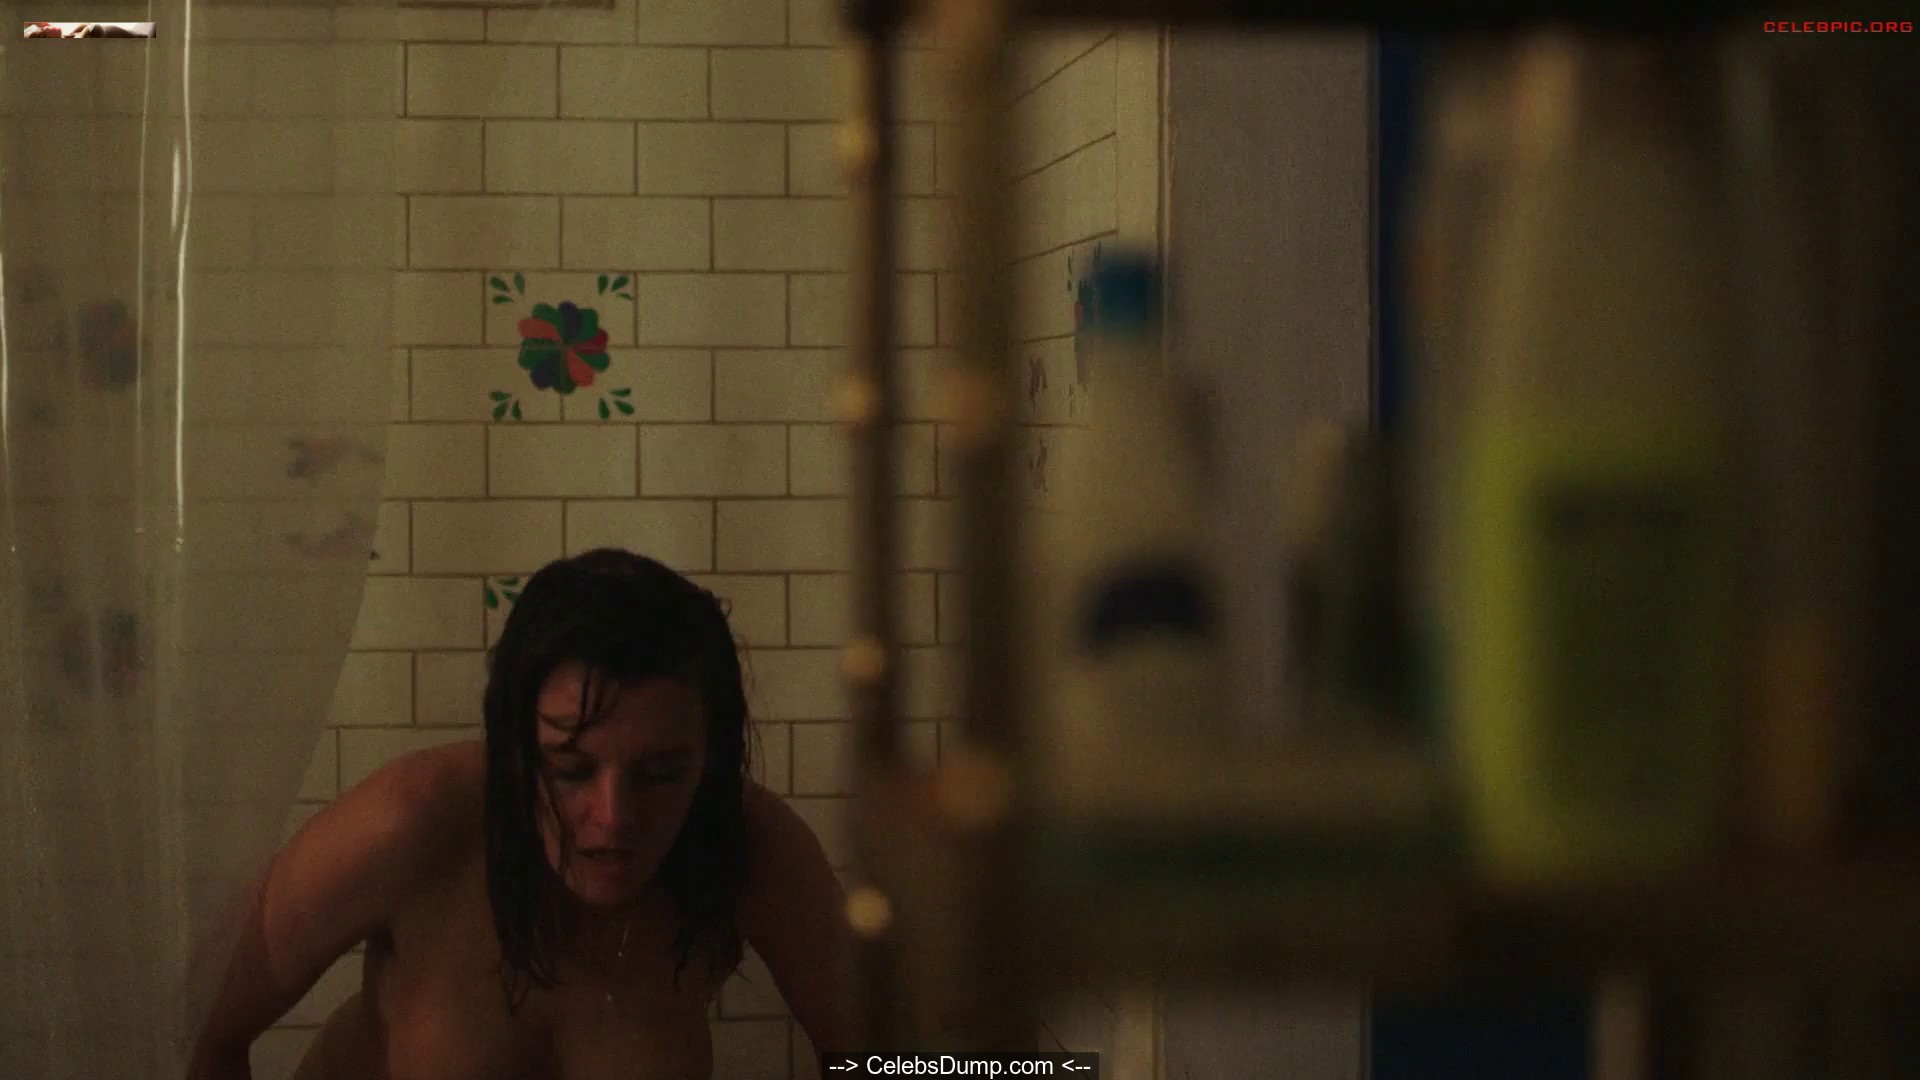 Frankie Shaw naked in a bathtub scenes from Smilf S02 E05 (2. cellairis.com...